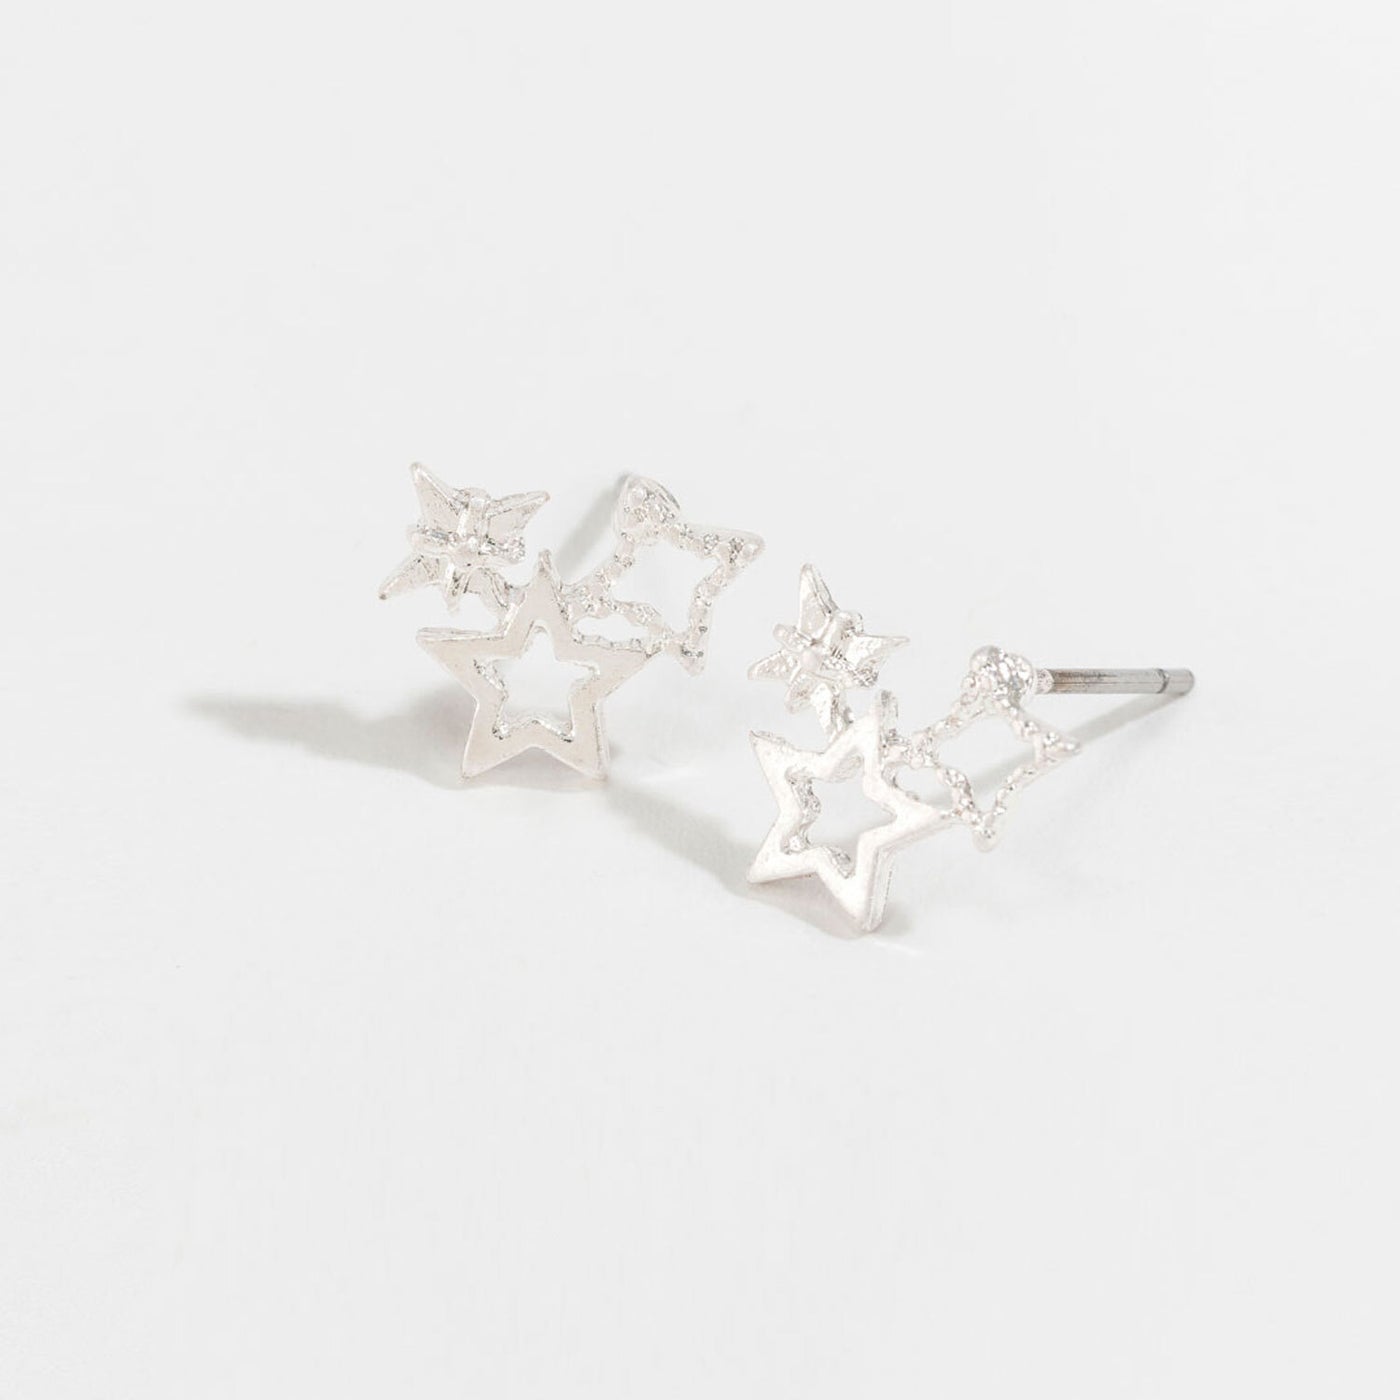 silver star cluster stud earrings on a white background